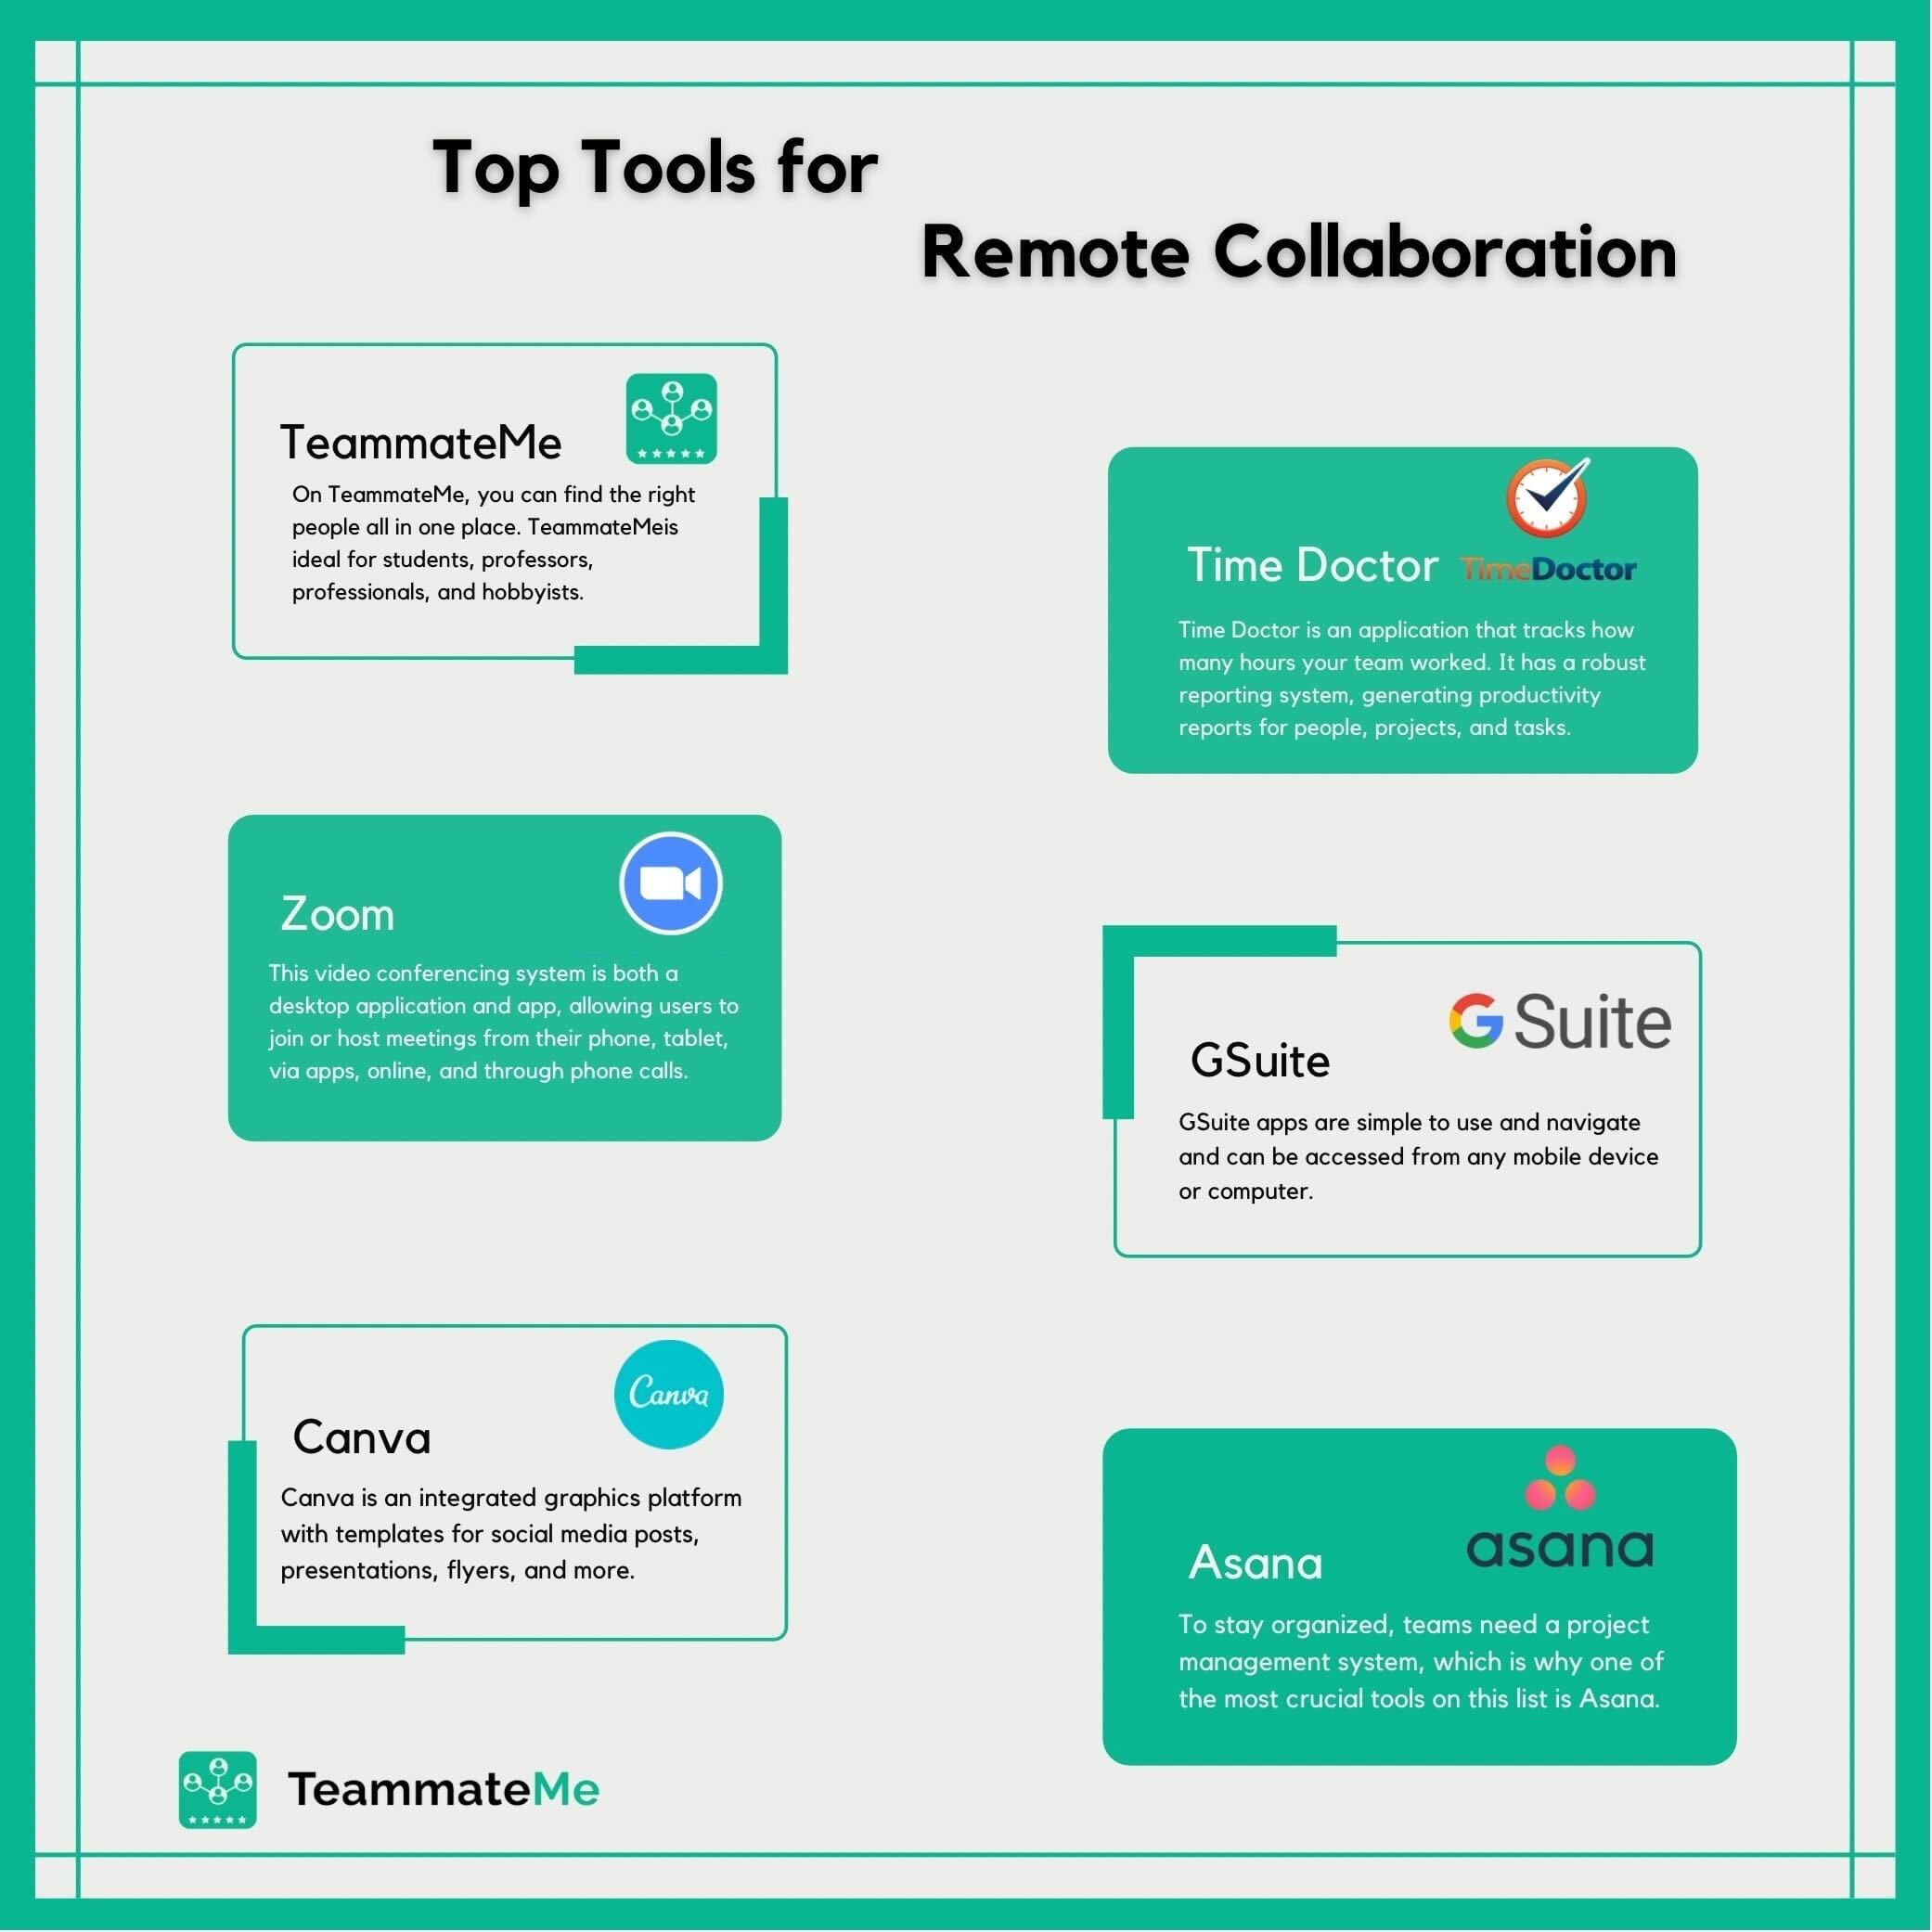 Top Tools for Remote Collaboration - Infographic